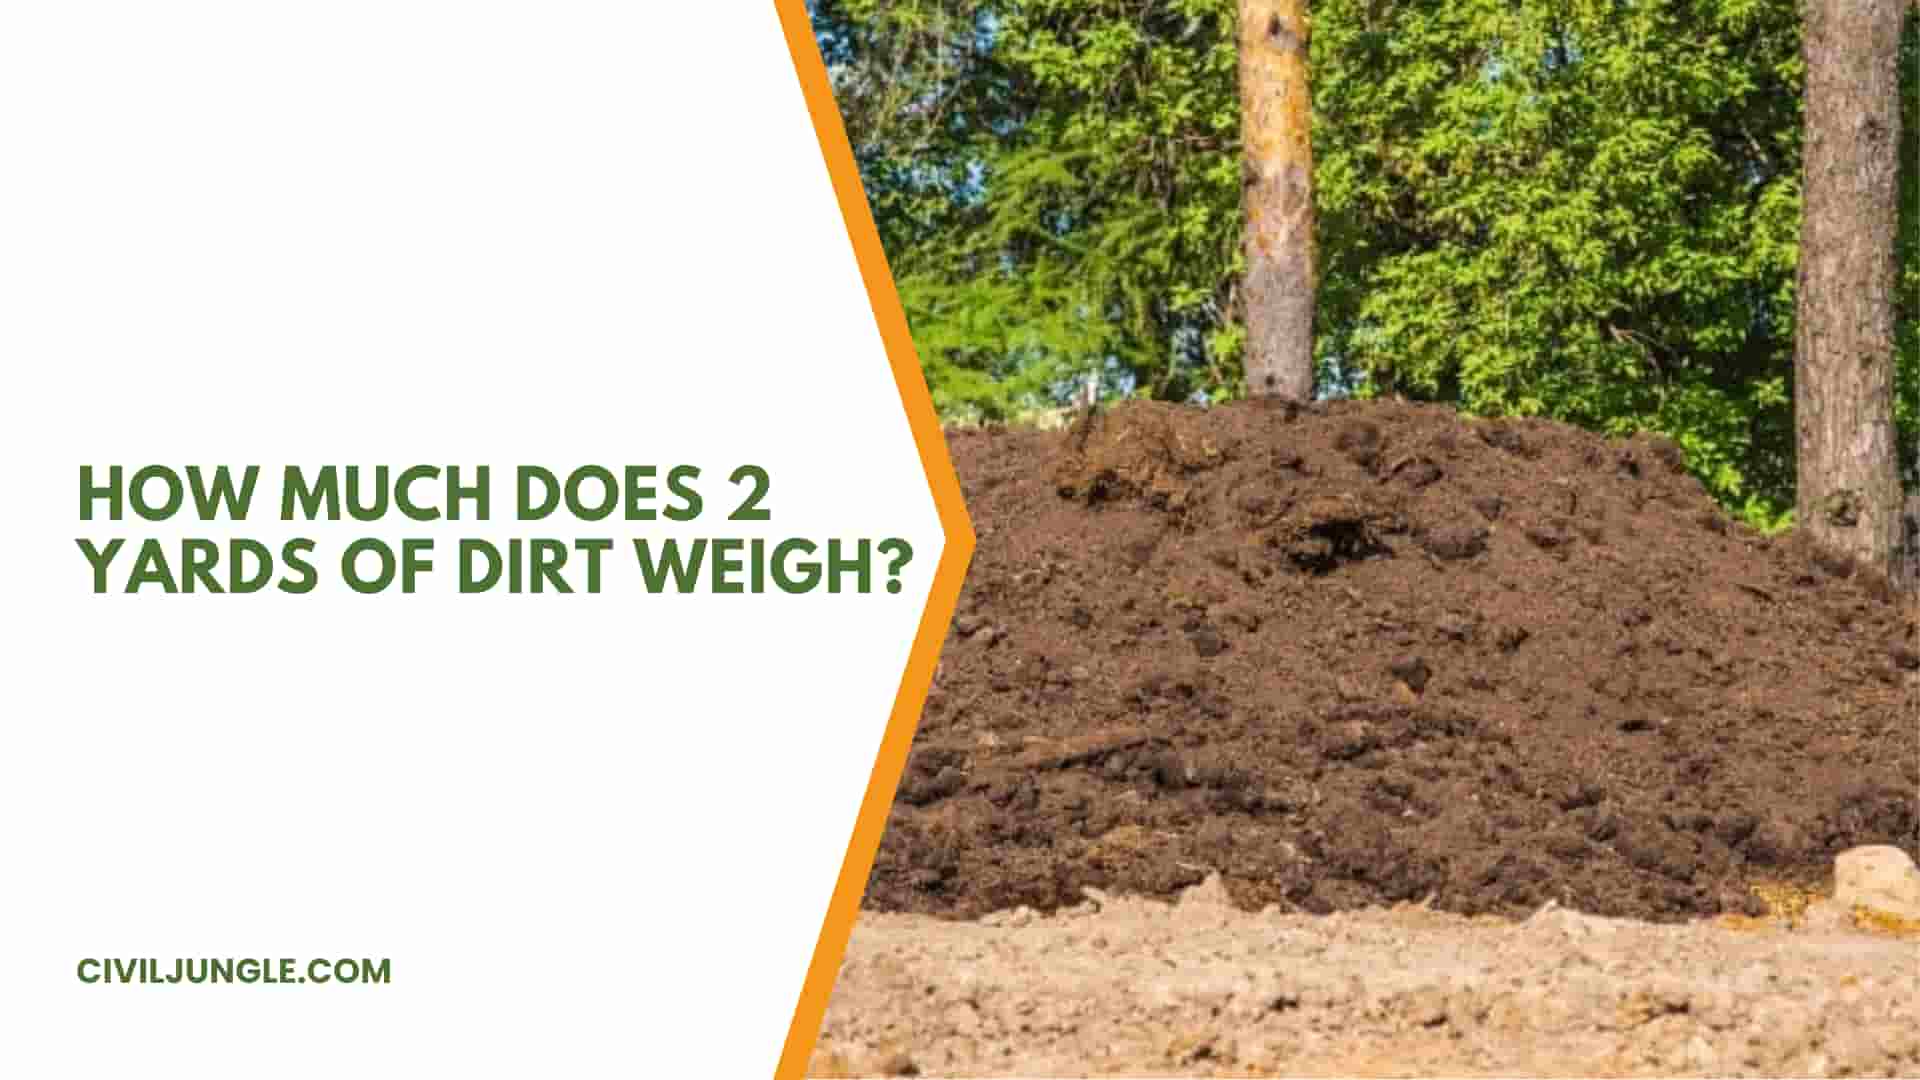 How Much Does 2 Yards of Dirt Weigh?